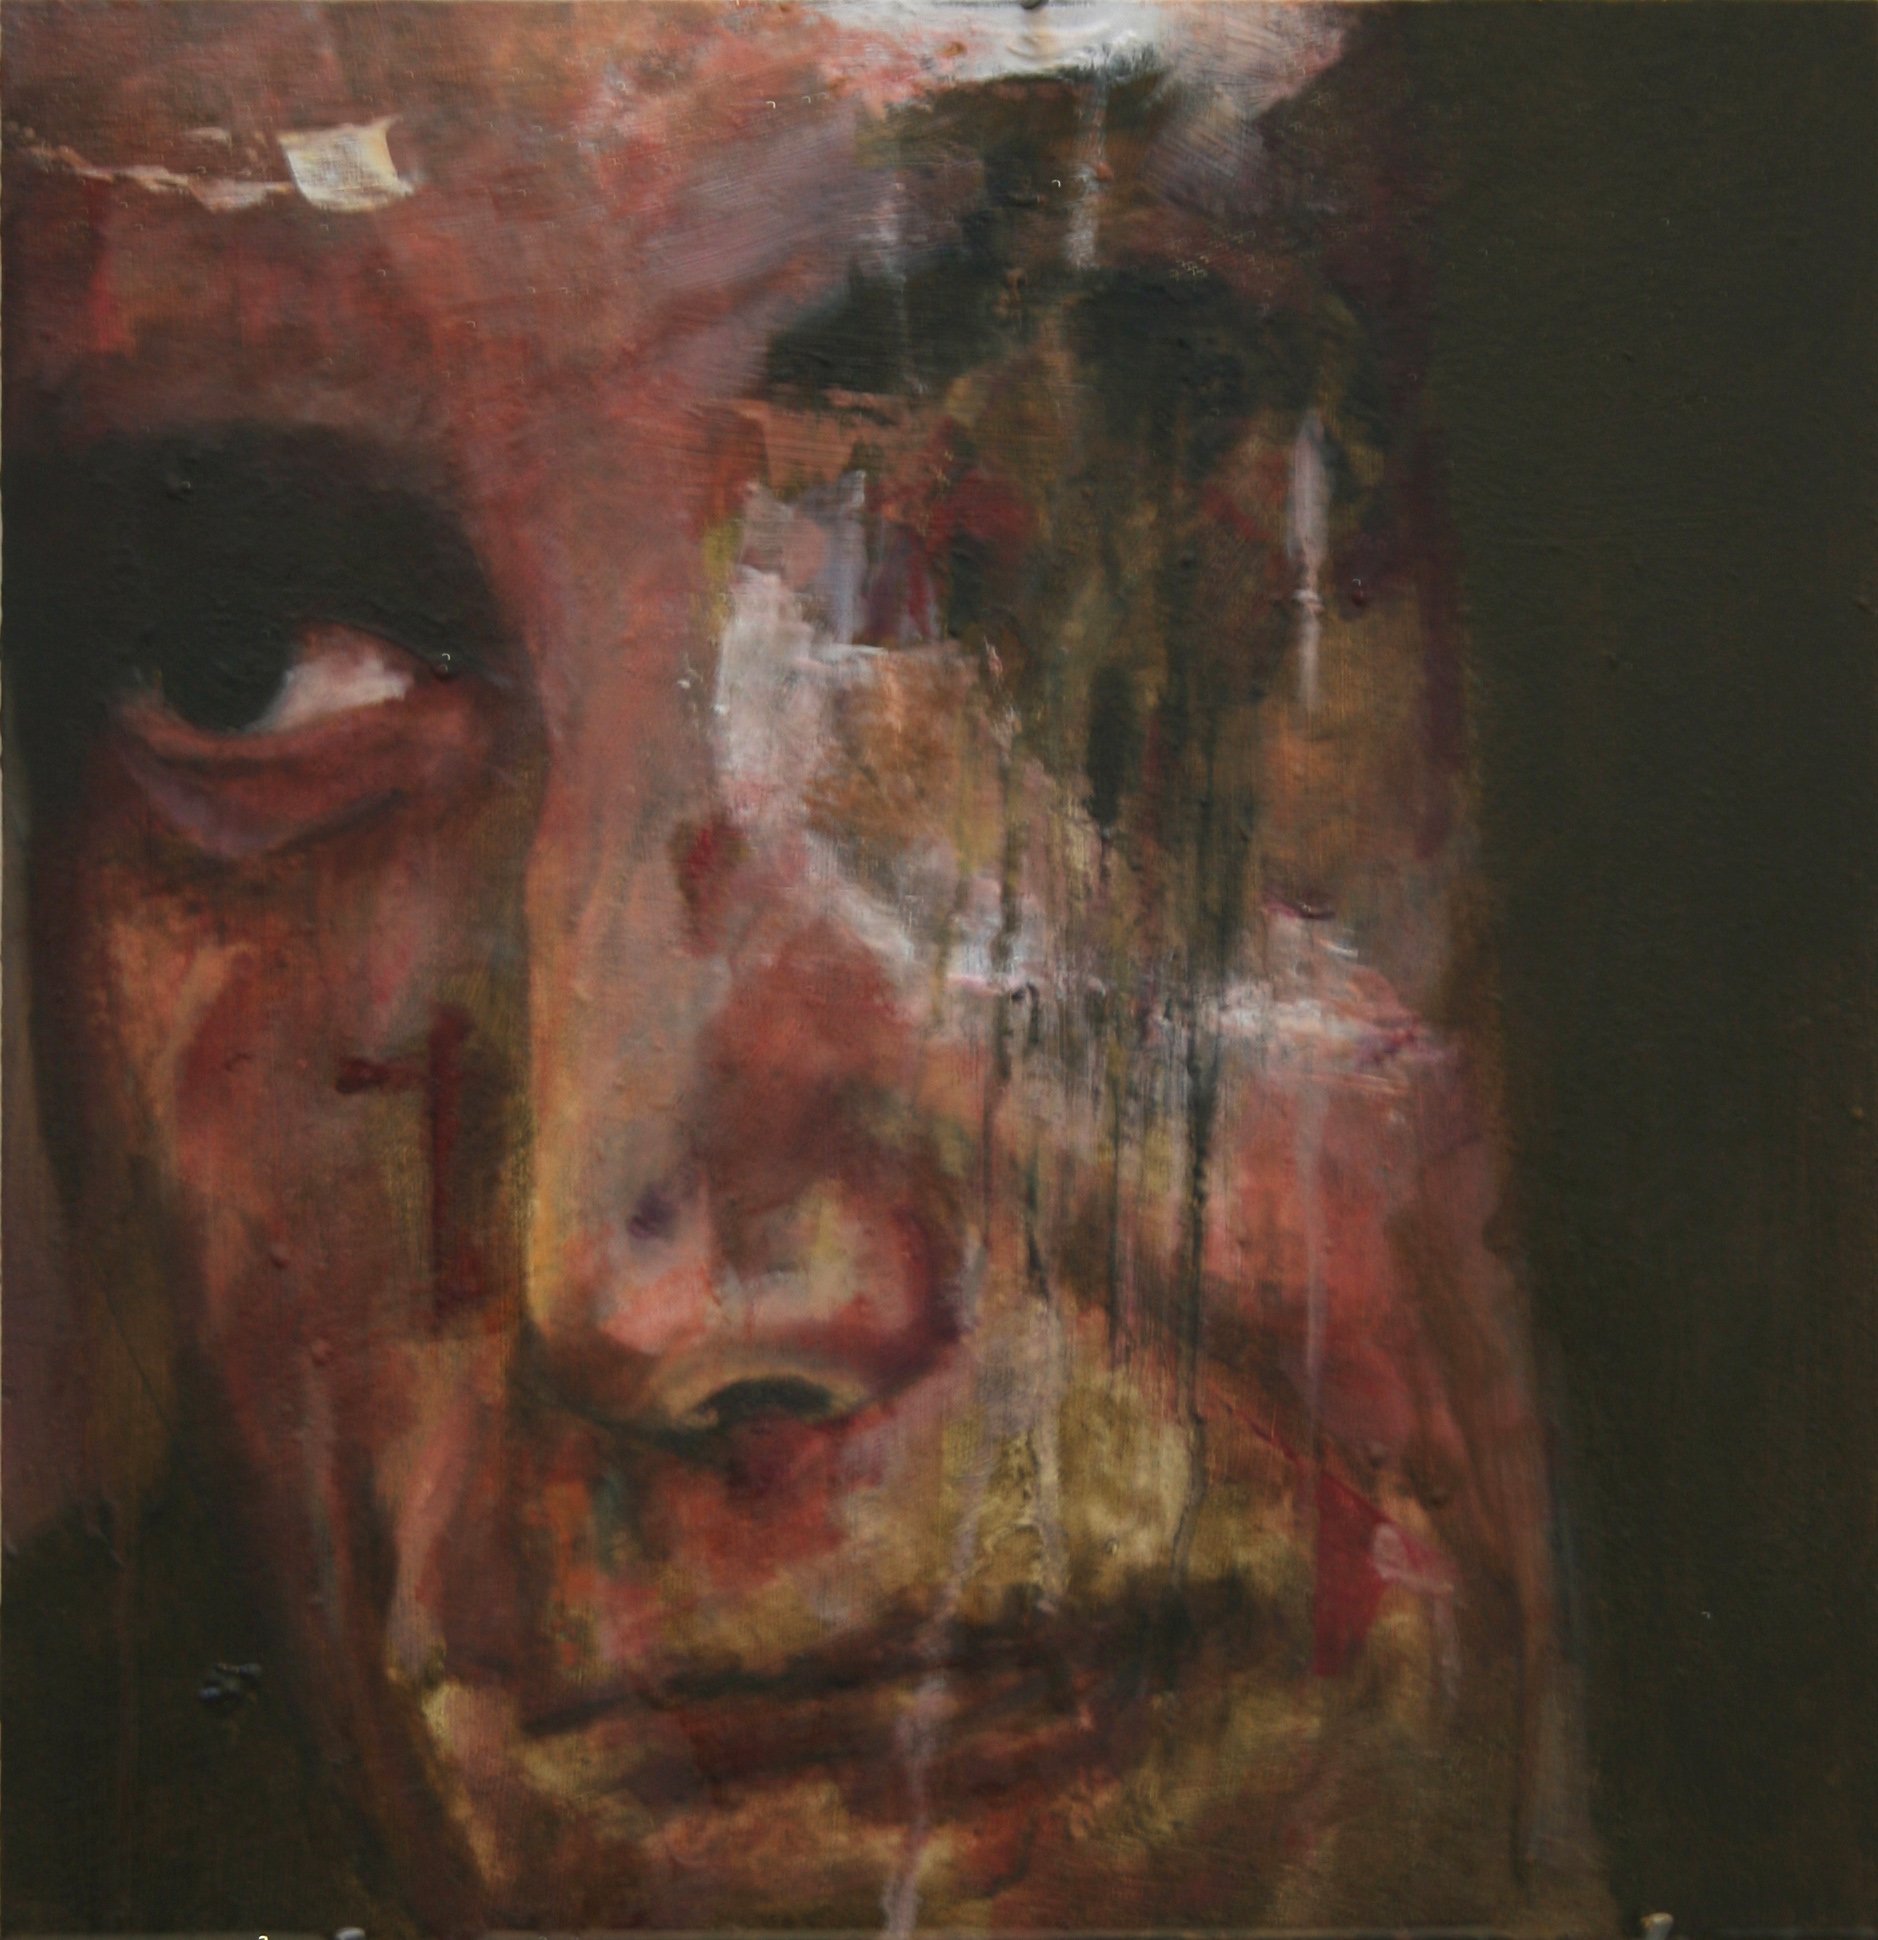 III Jesus falls the first time the Stations of the Cross 2010 Oil on Board 31x30cms.jpg